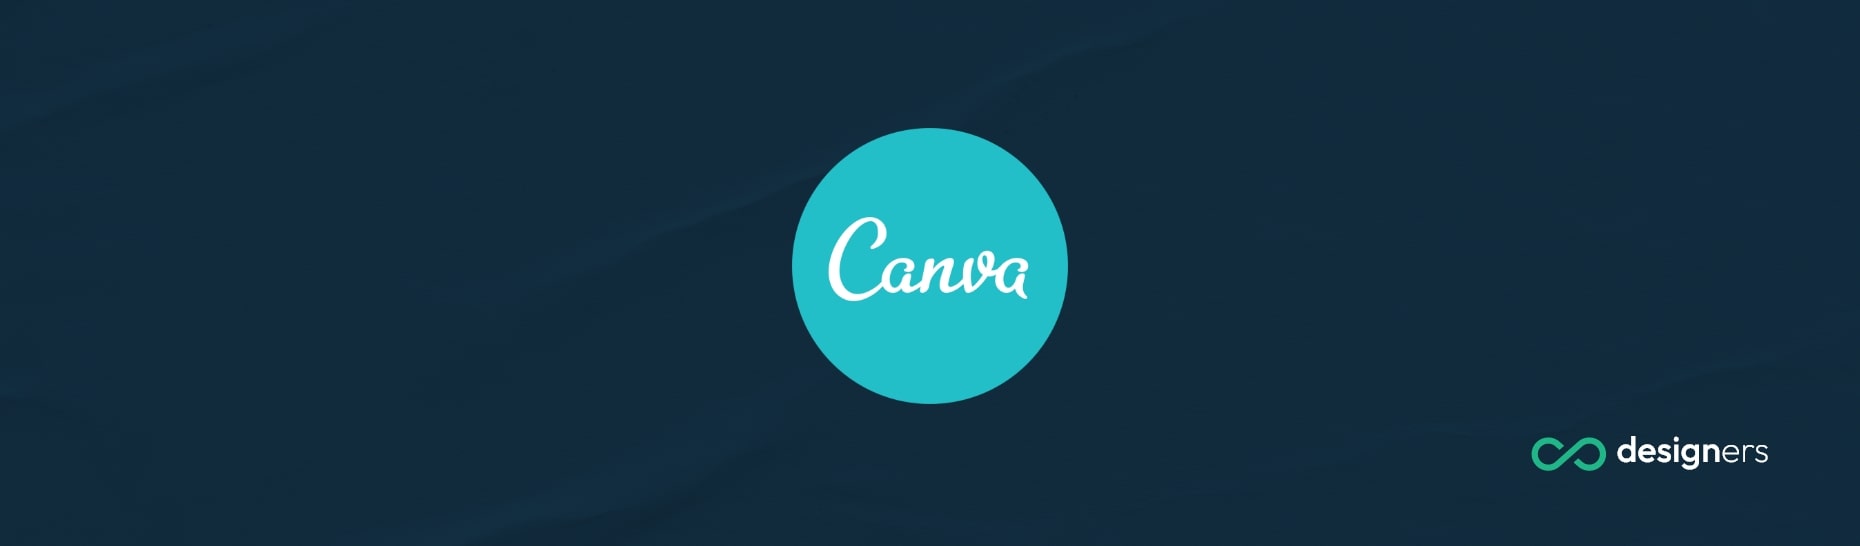 Does Canva Track QR Codes?